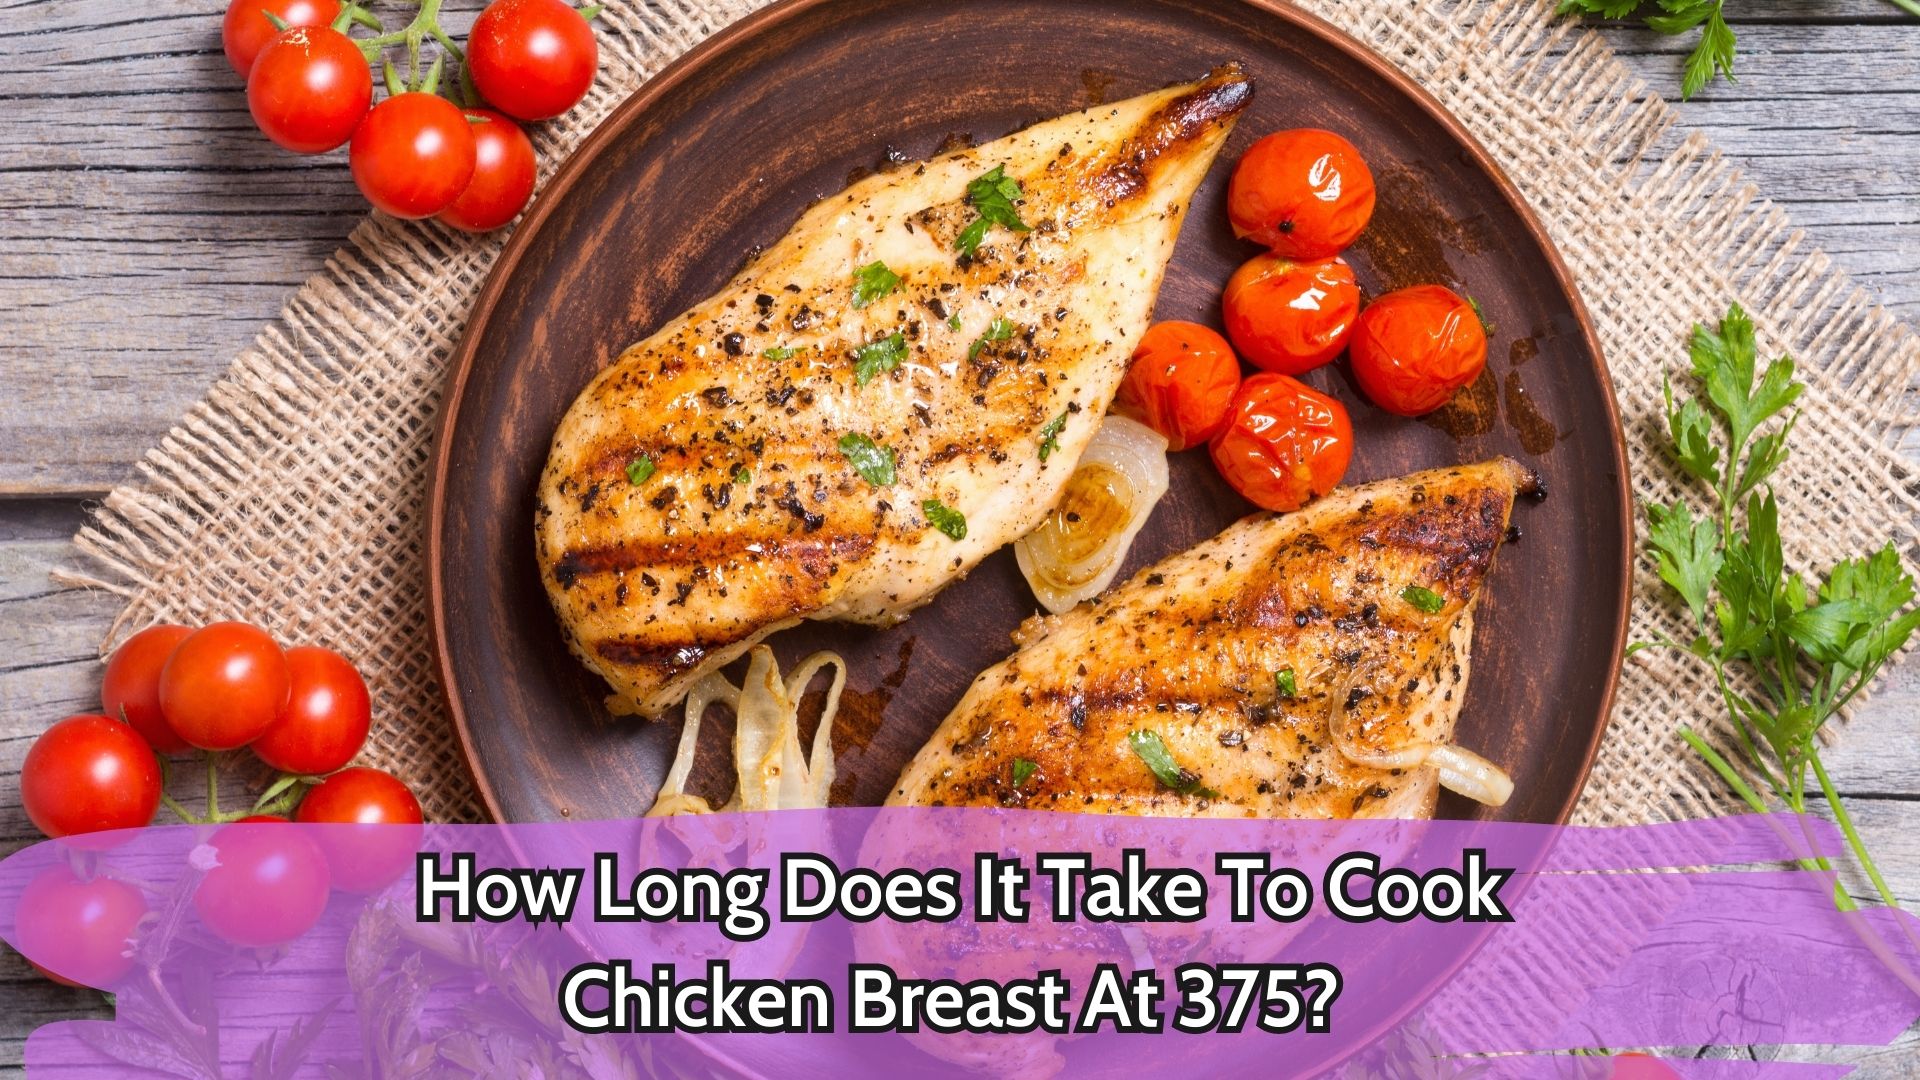 How Long Does It Take To Cook Chicken Breast At 375?